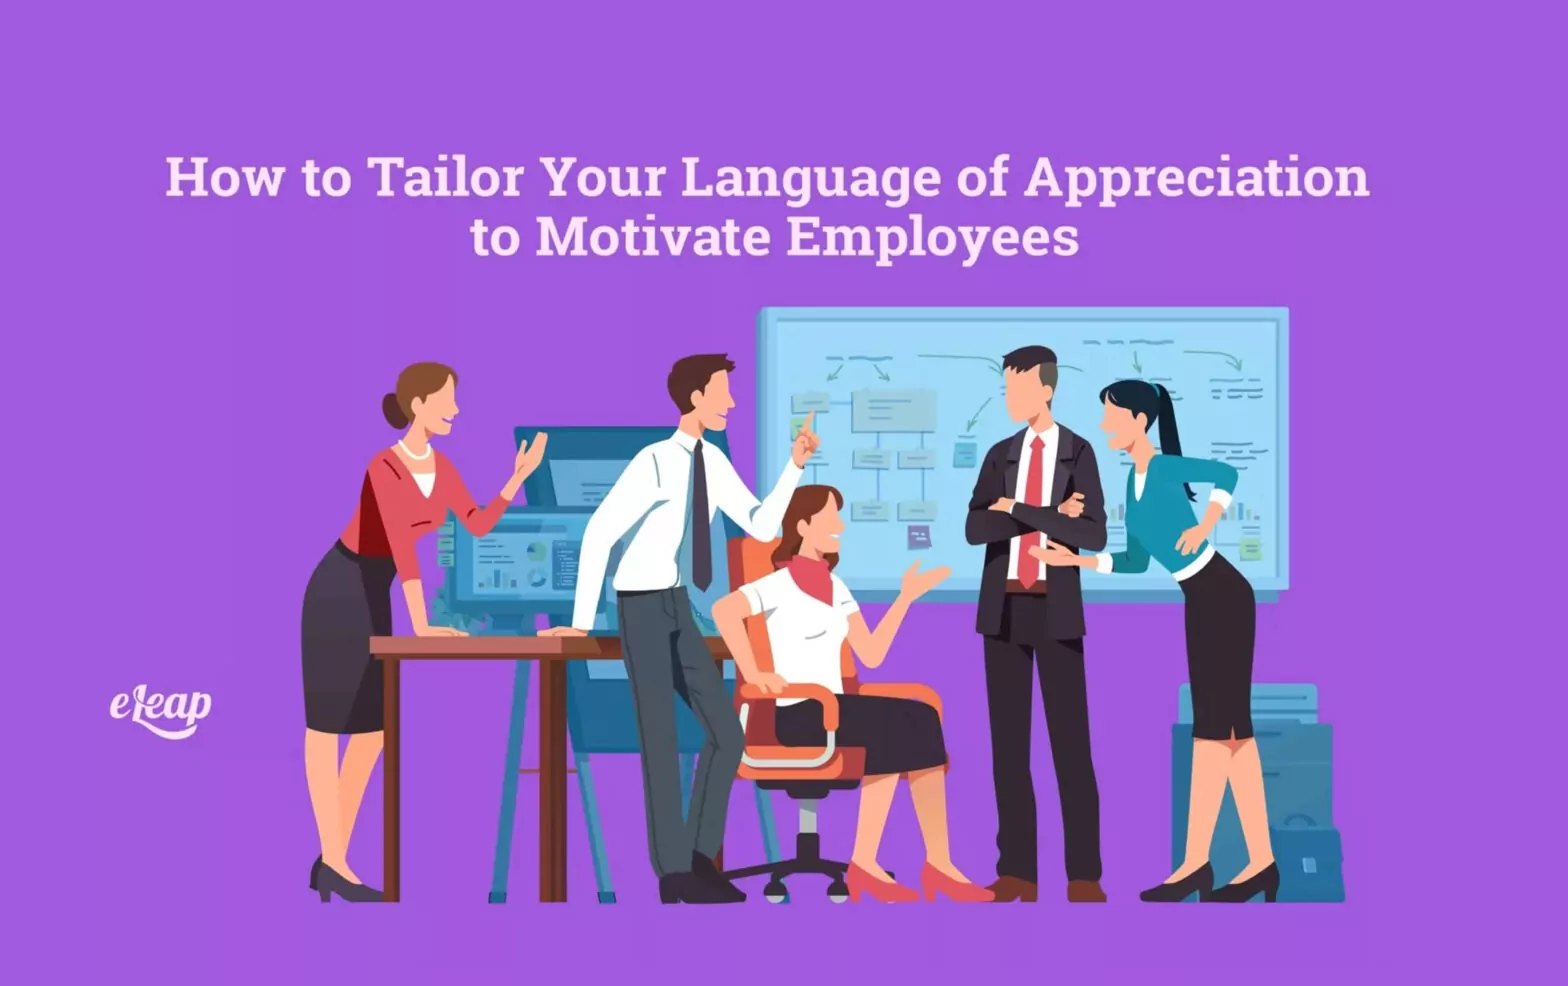 How to Tailor Your Language of Appreciation to Motivate Employees